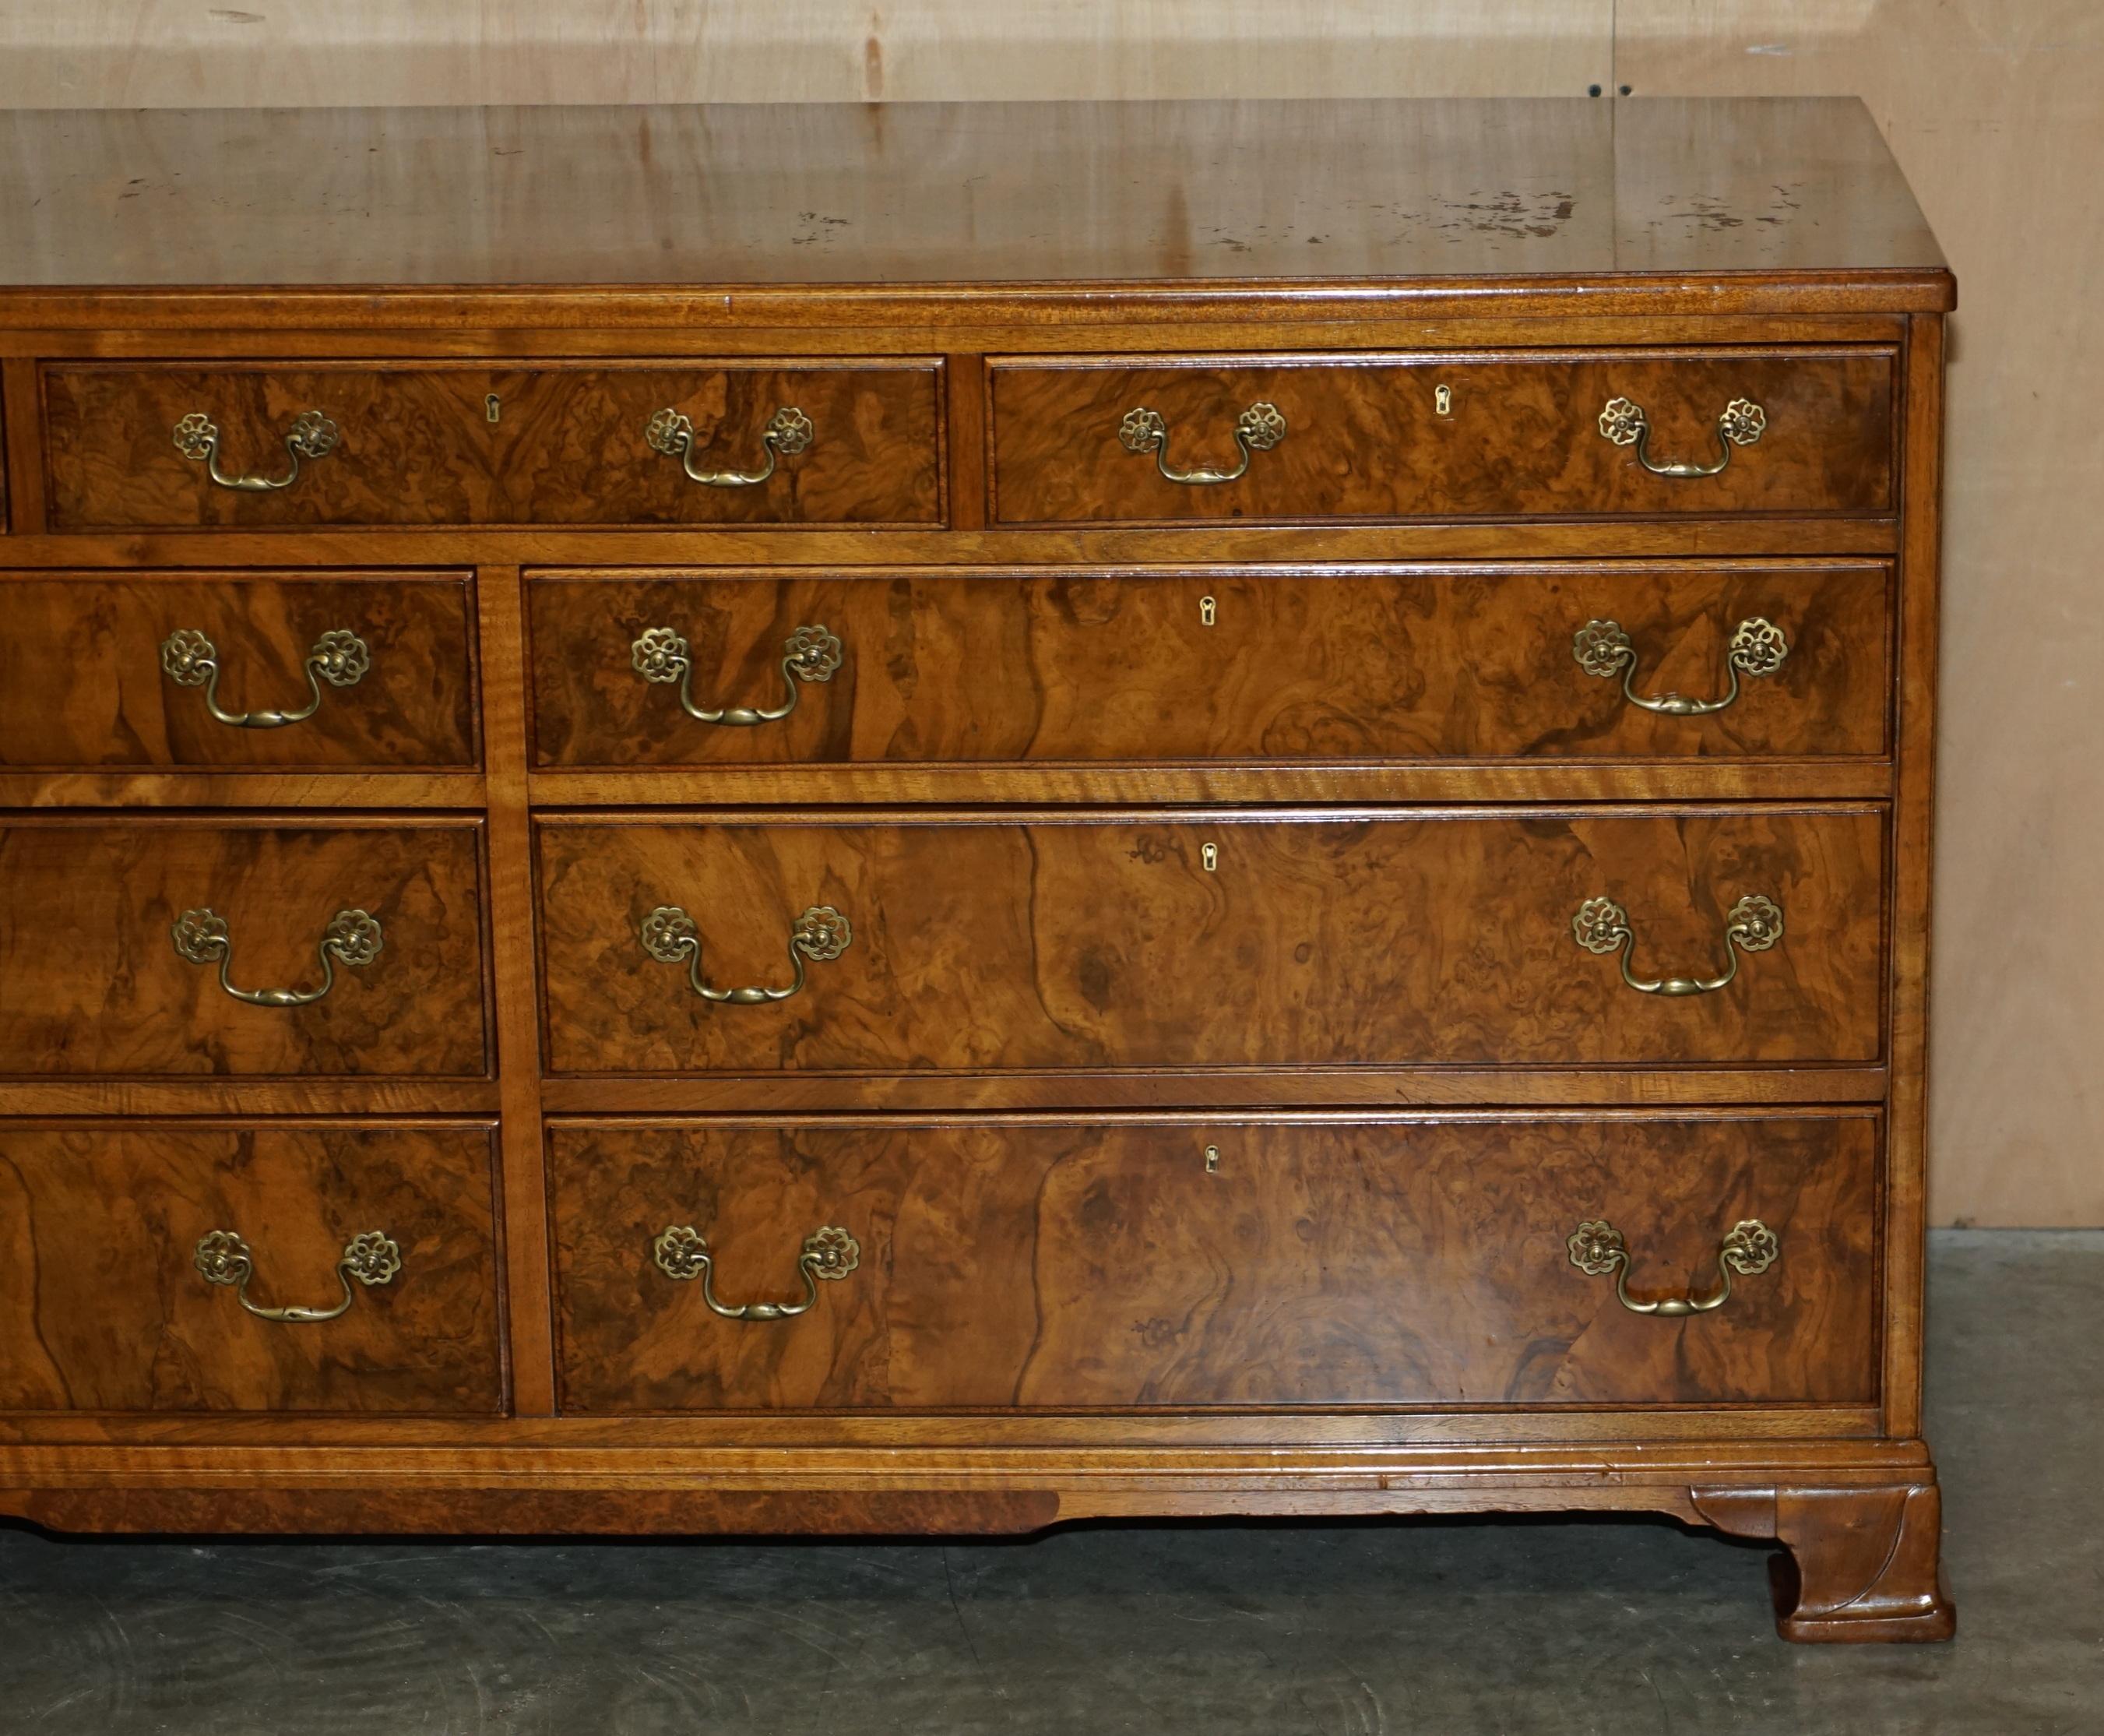 Hand-Crafted Stunning Large Sideboard Sized Bank or Chest of Drawers in Burr and Burl Walnut